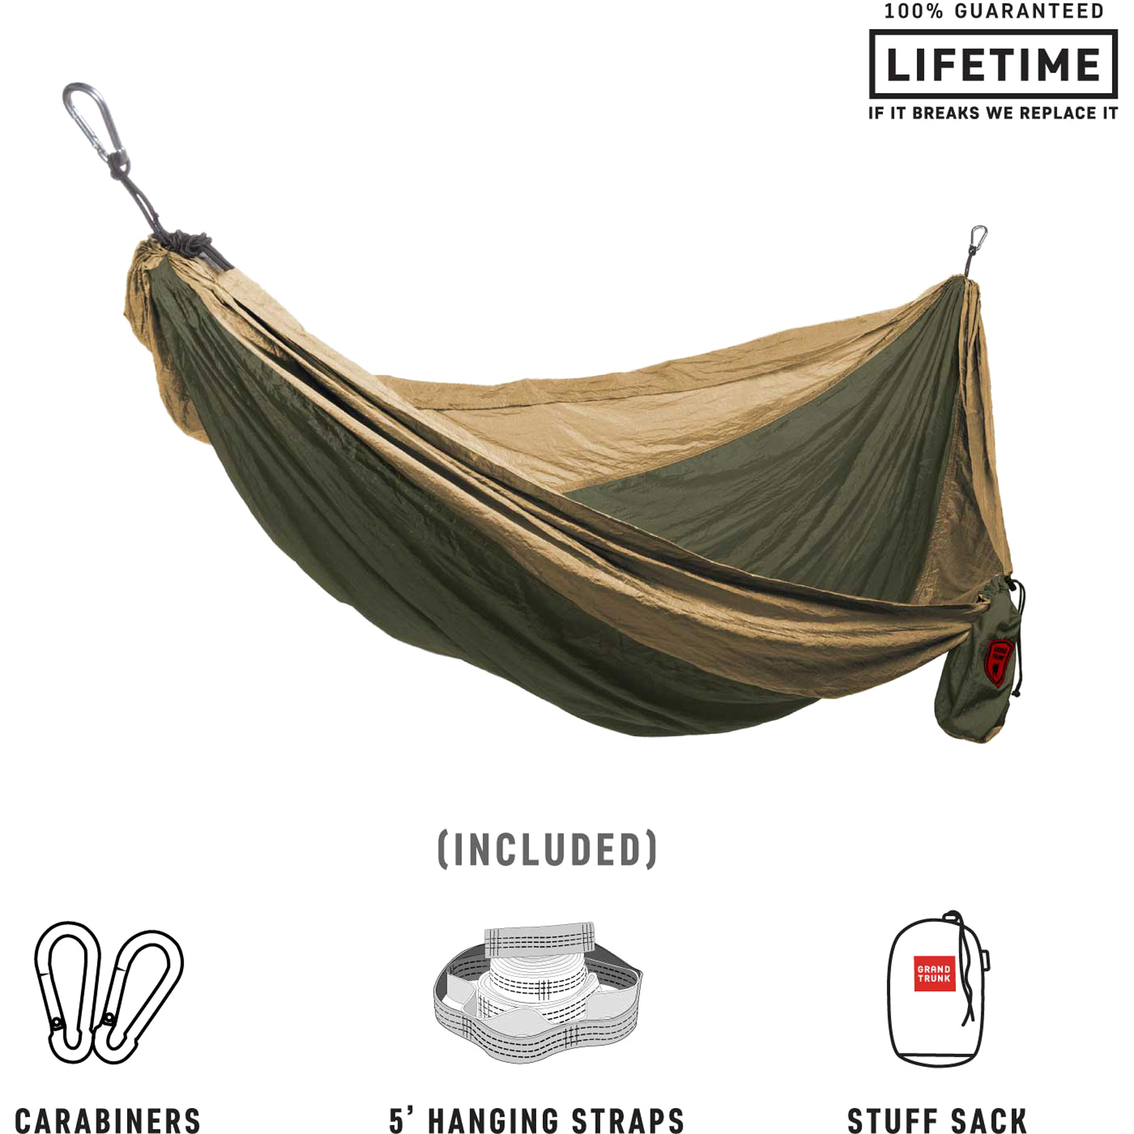 Grand Trunk Double Parachute Nylon Hammock with Straps - Image 5 of 8